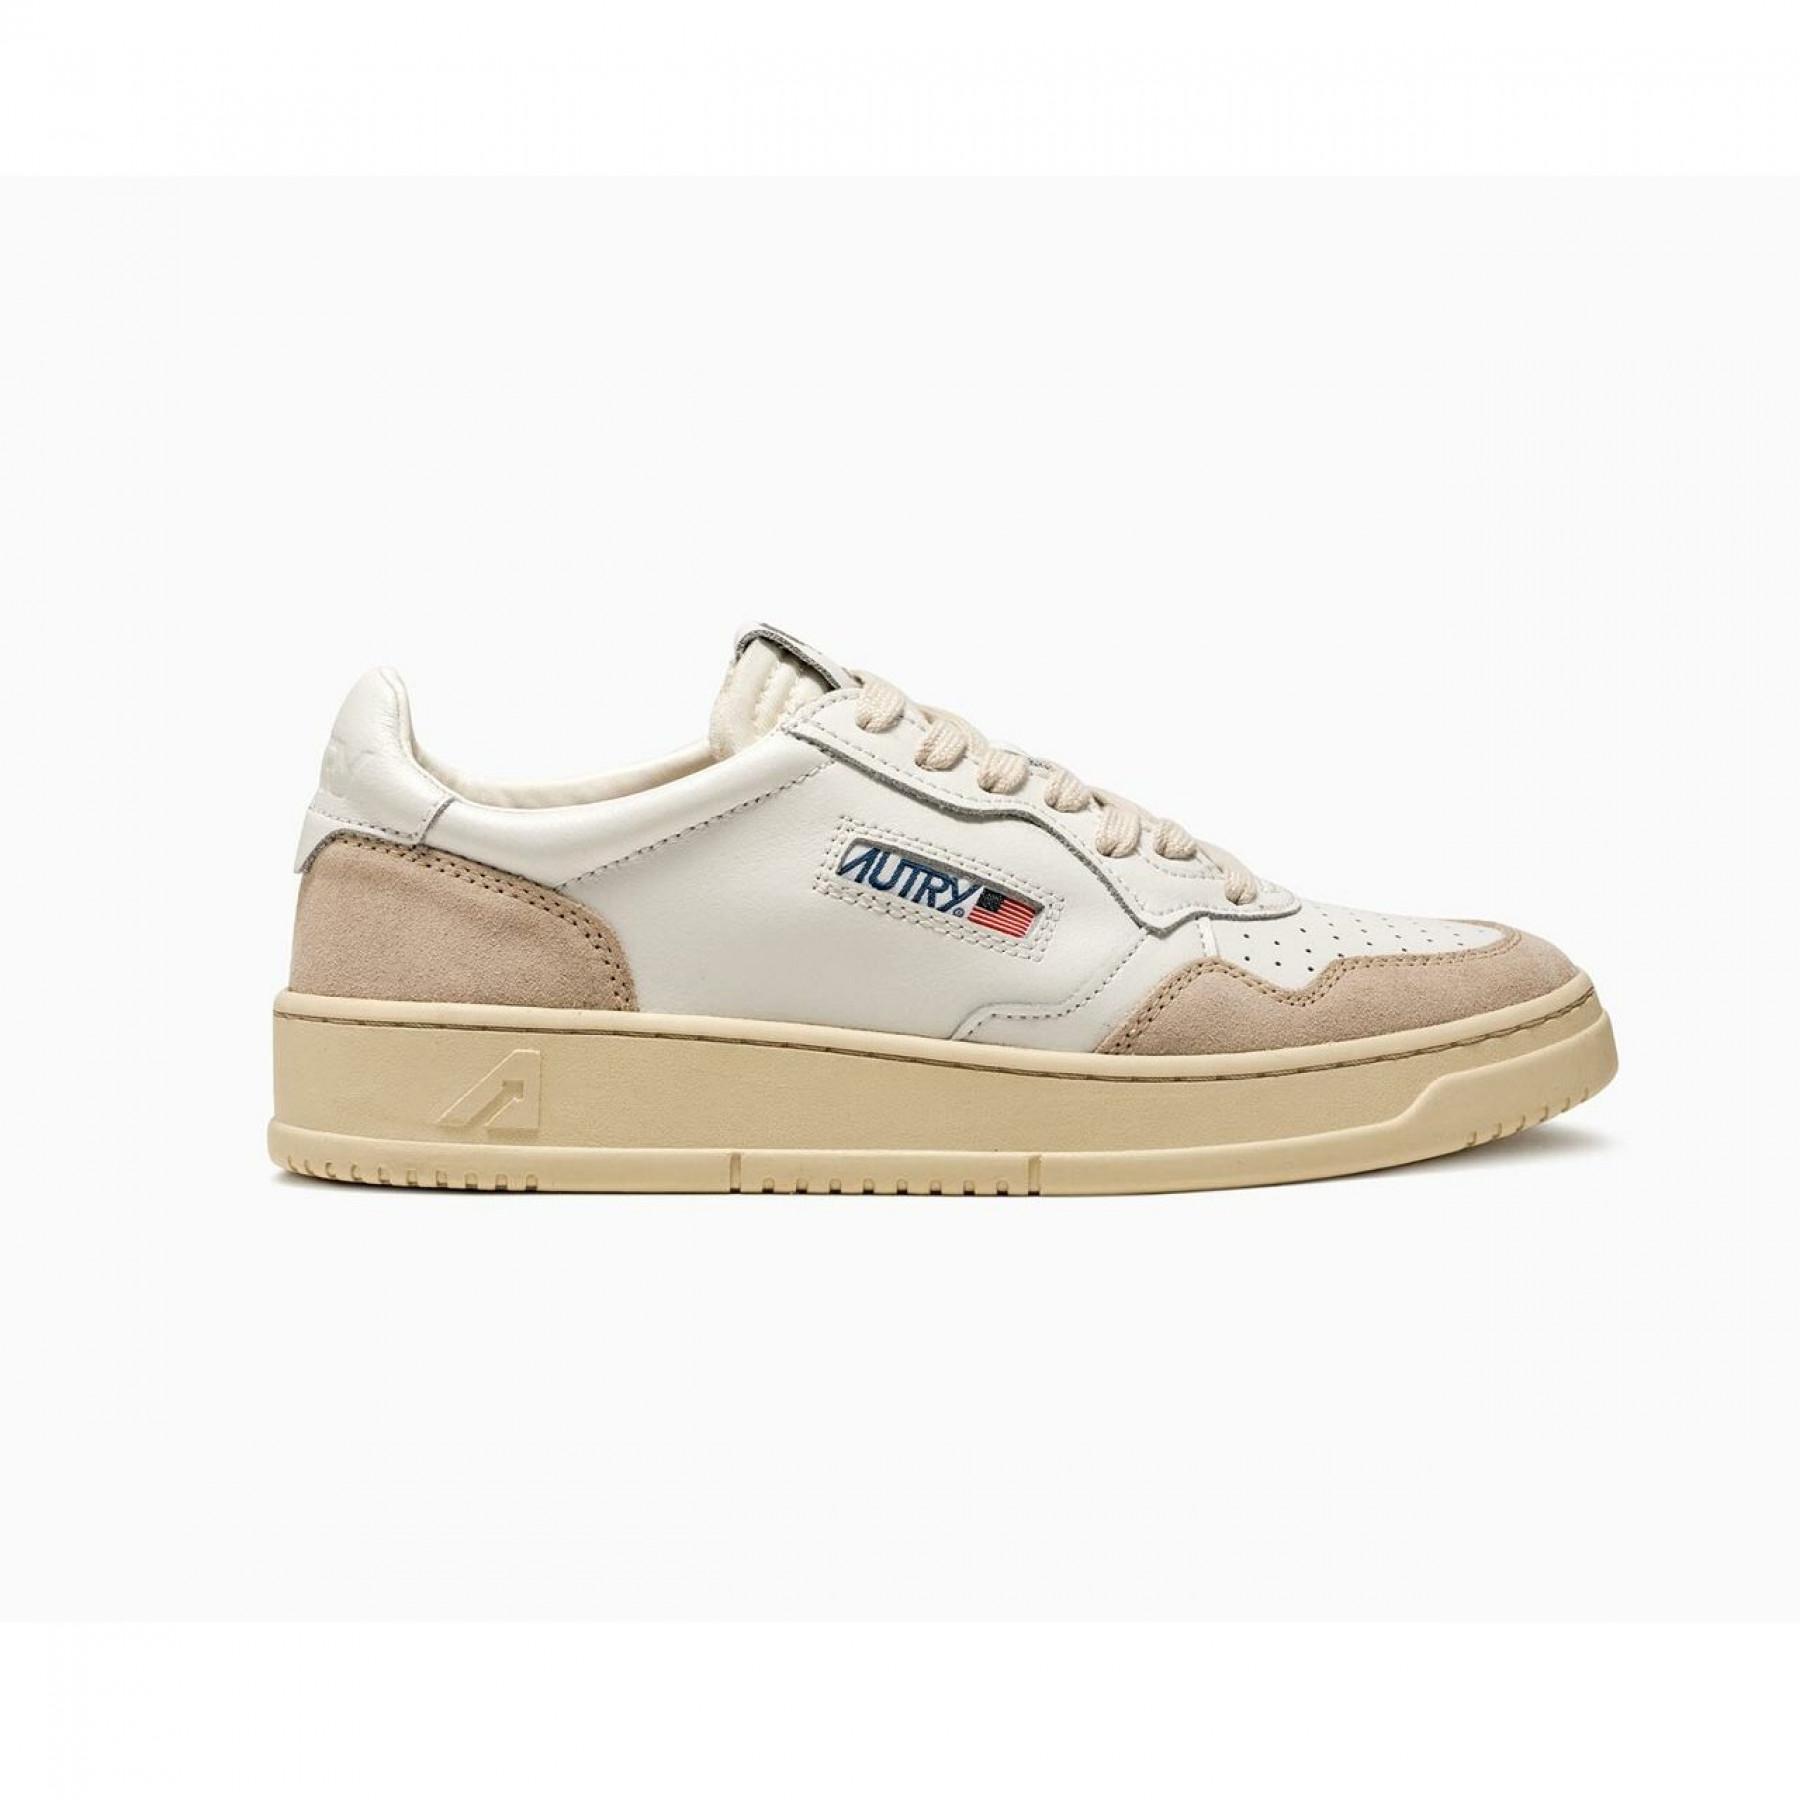 Baskets femme Autry Medalist LS20 Leather/Suede White